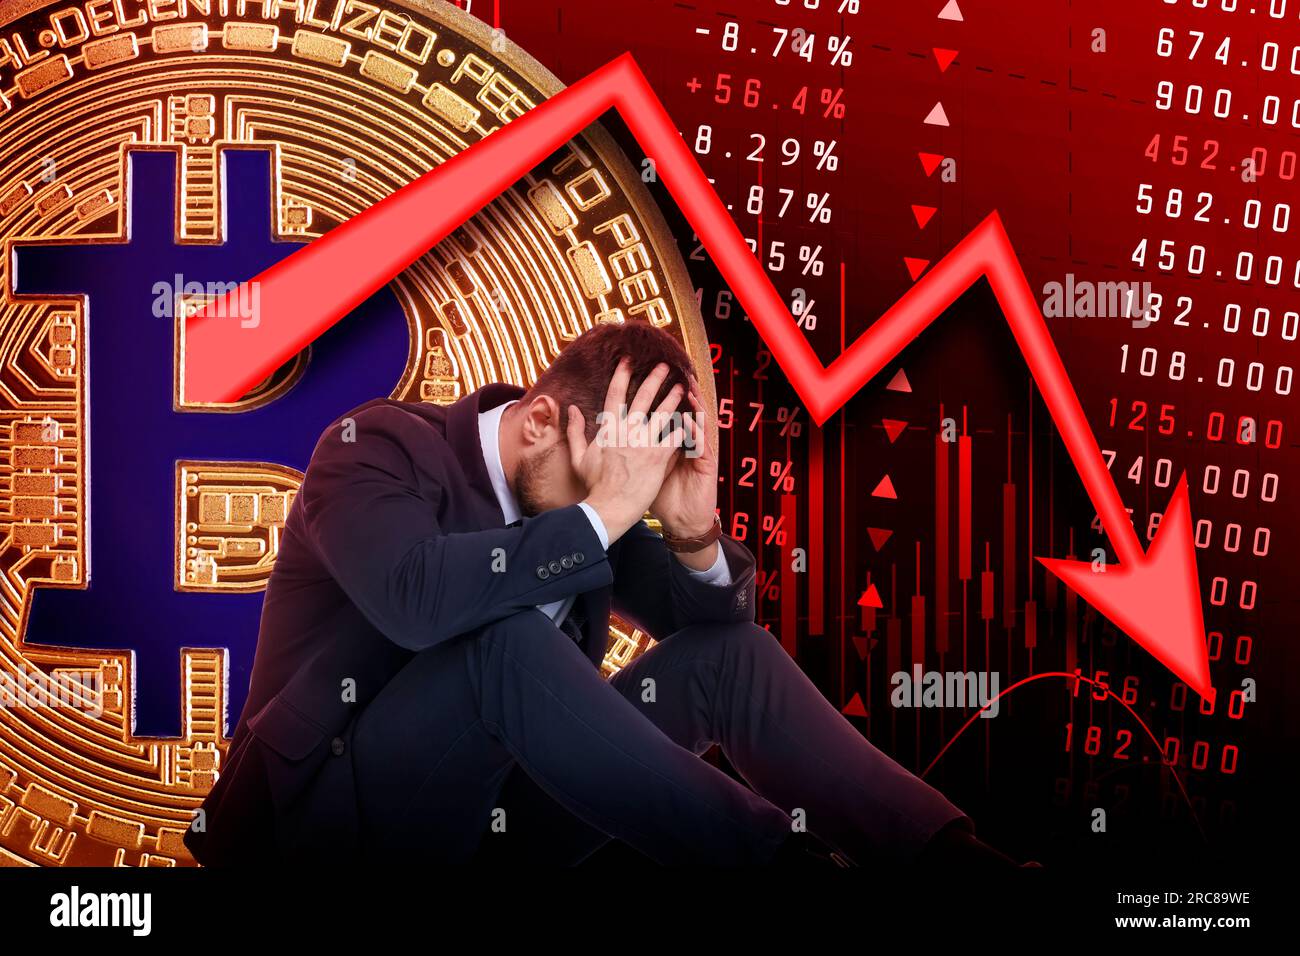 Cryptocurrency collapse. Collage with photo of stressed trader, bitcoin and data charts Stock Photo